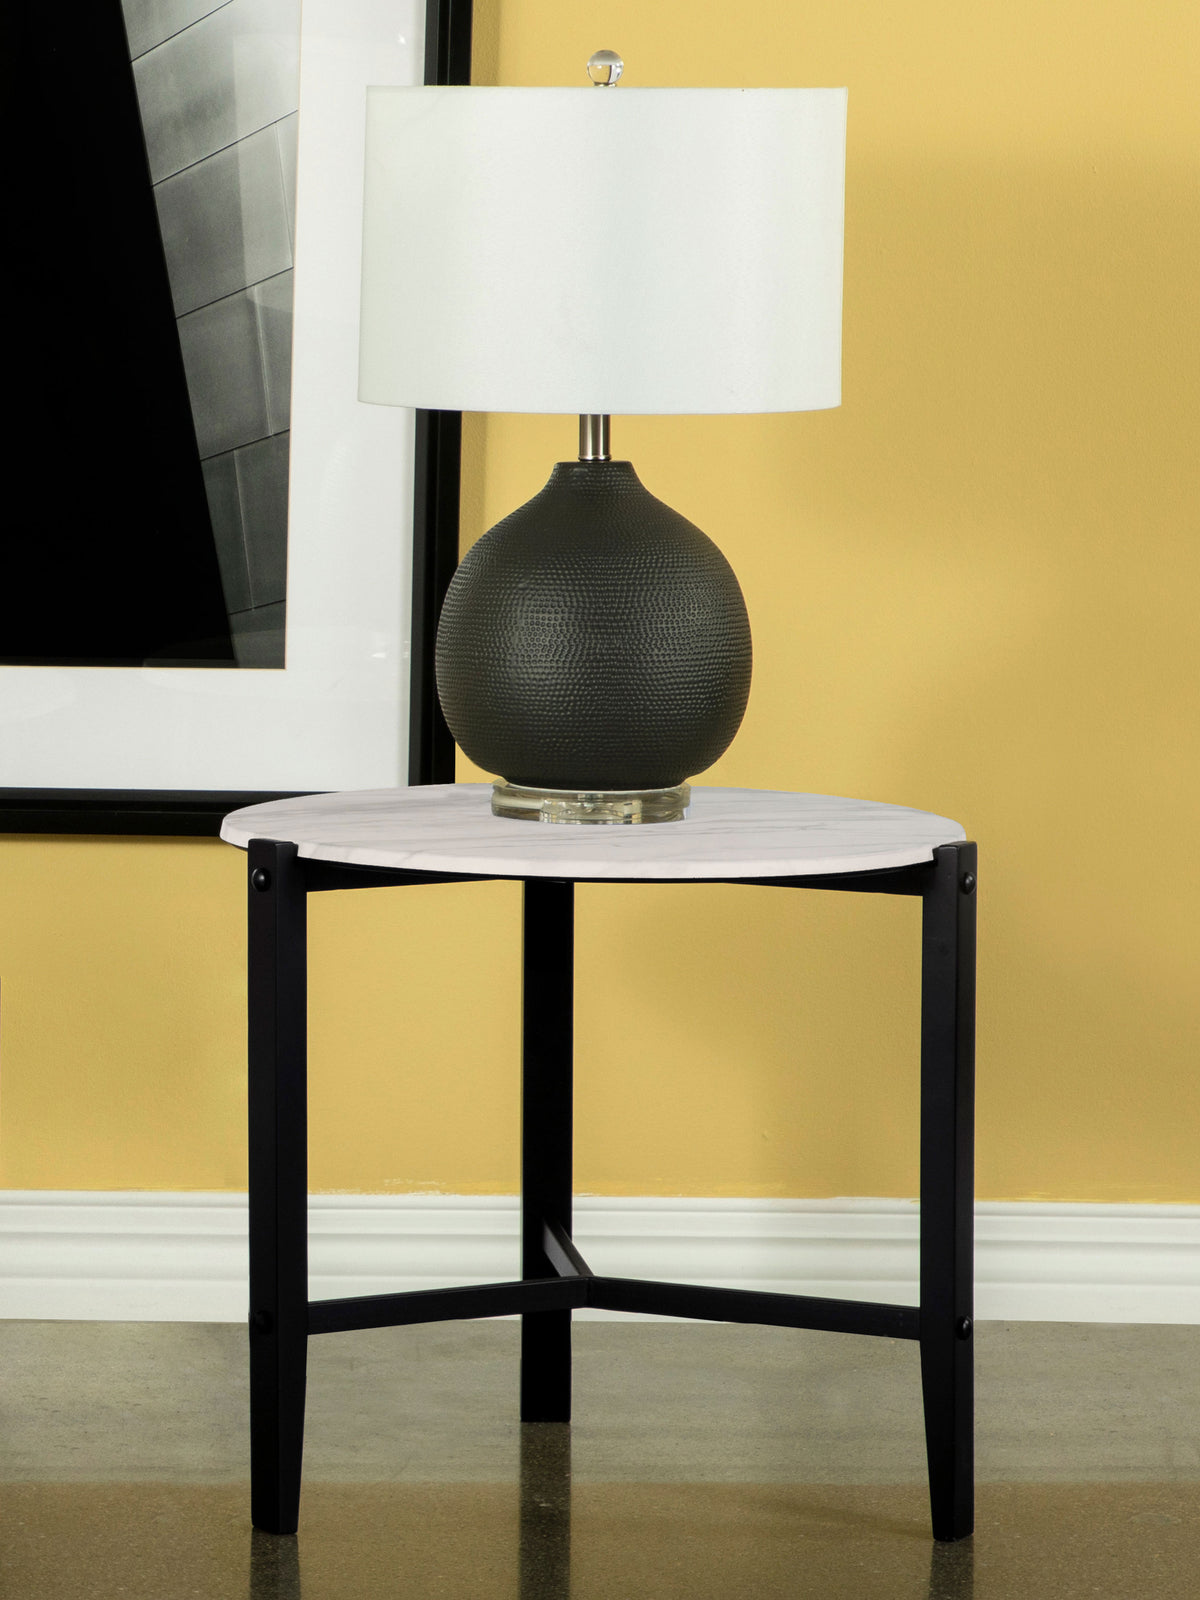 Tandi Round End Table Faux White Marble and Black Tandi Round End Table Faux White Marble and Black Half Price Furniture